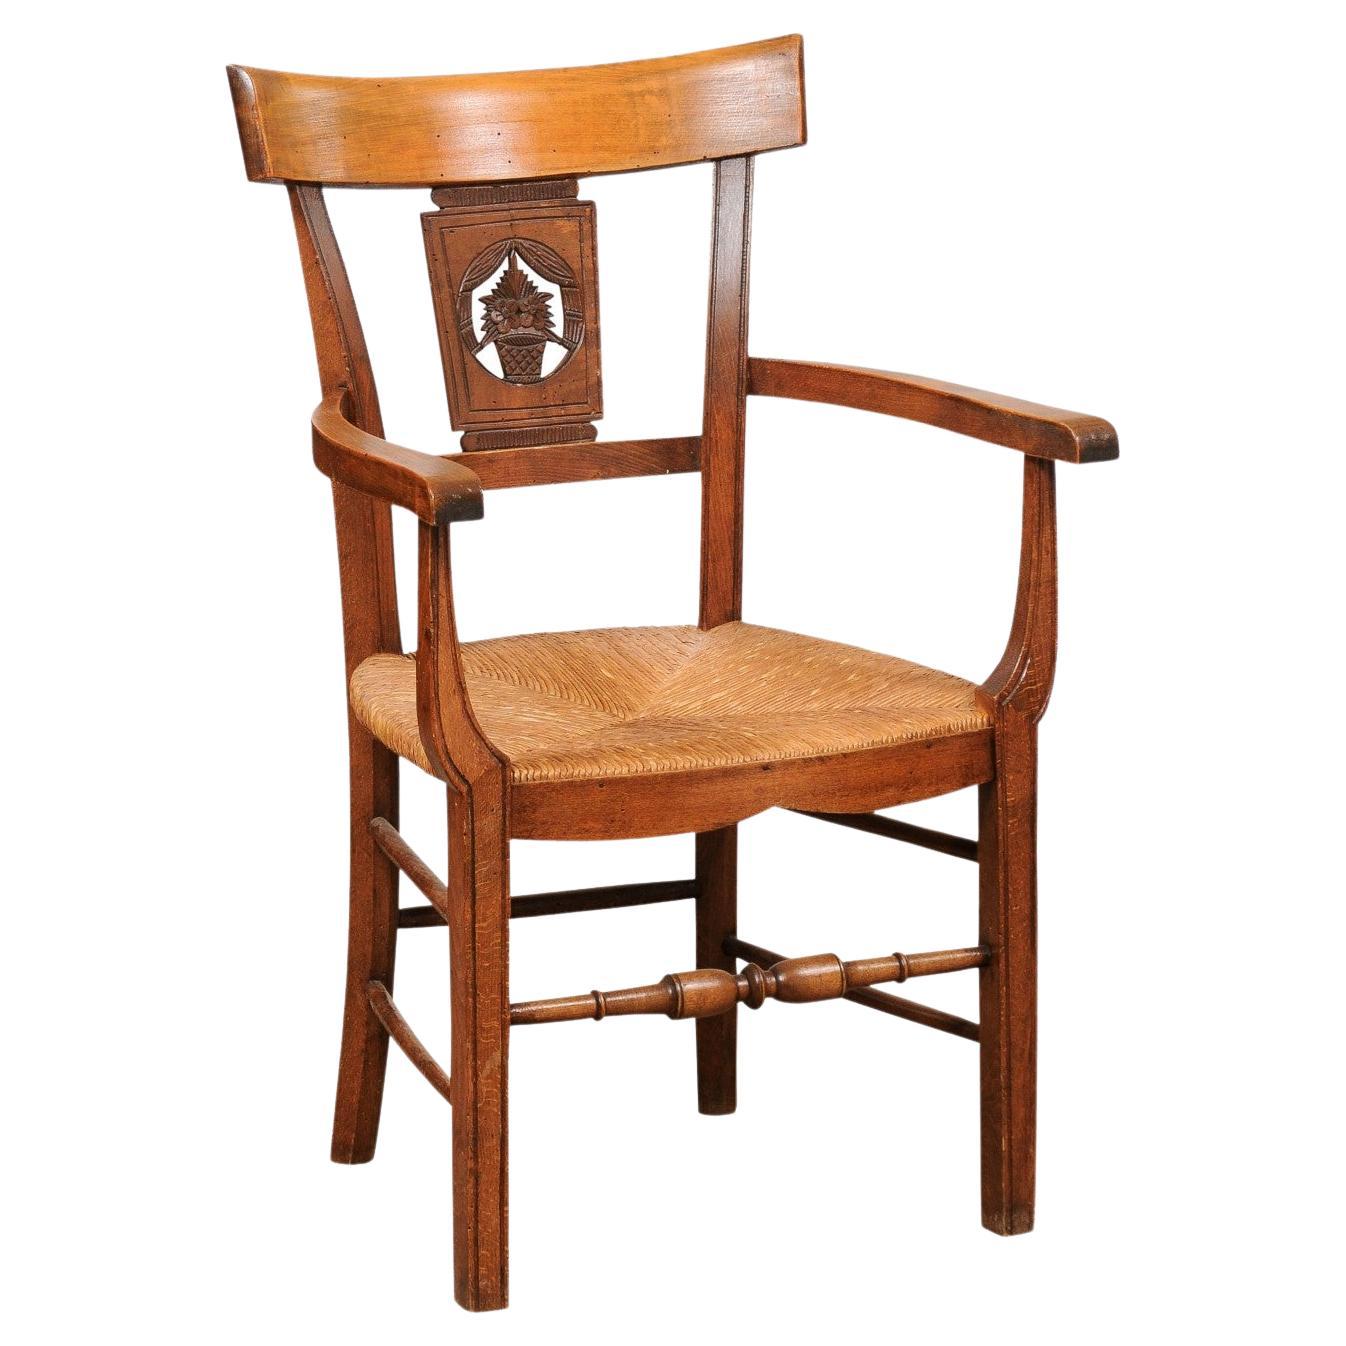 Fruitwood Rush Seat Armchair with Flower Basket Backsplat, Italy ca. 1850 For Sale